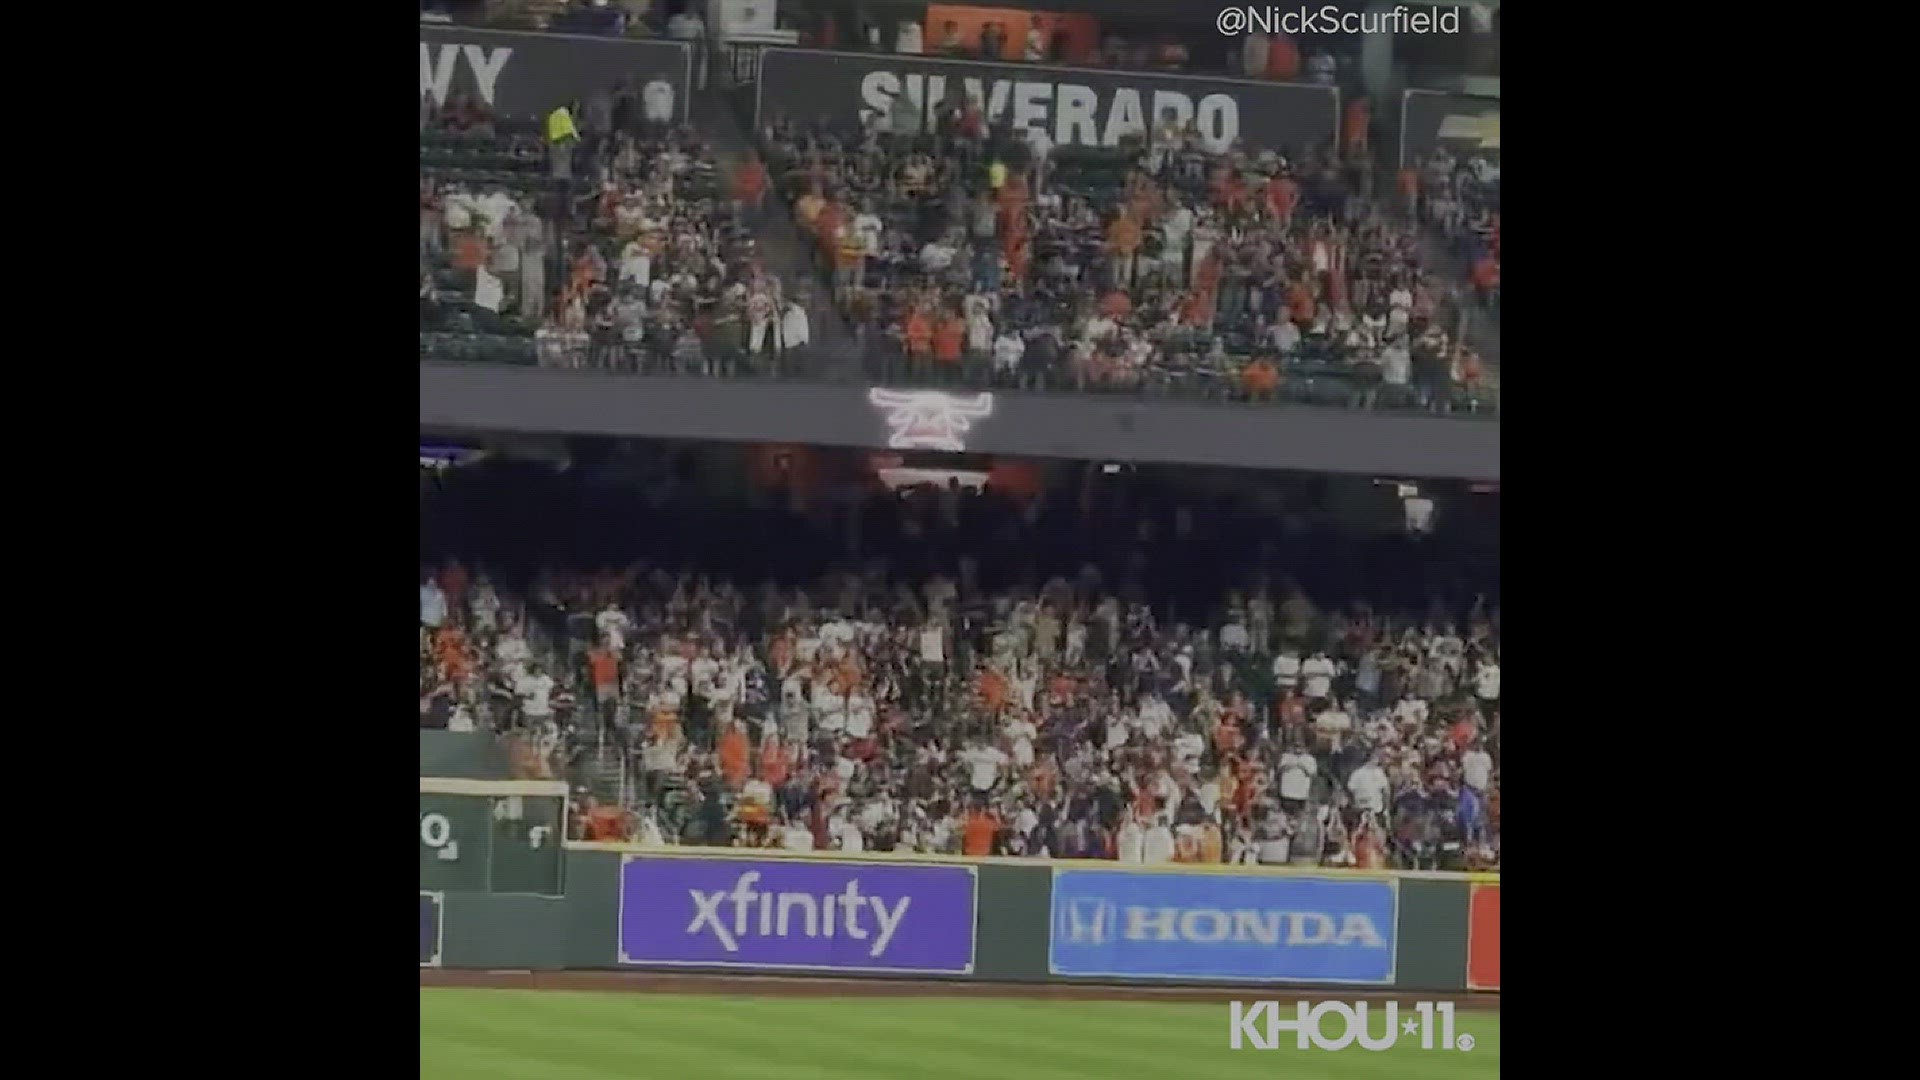 Fans egg on Kyle Tucker as Astros right fielder gives umpire an earful  after interference call: I like this side of Tuck